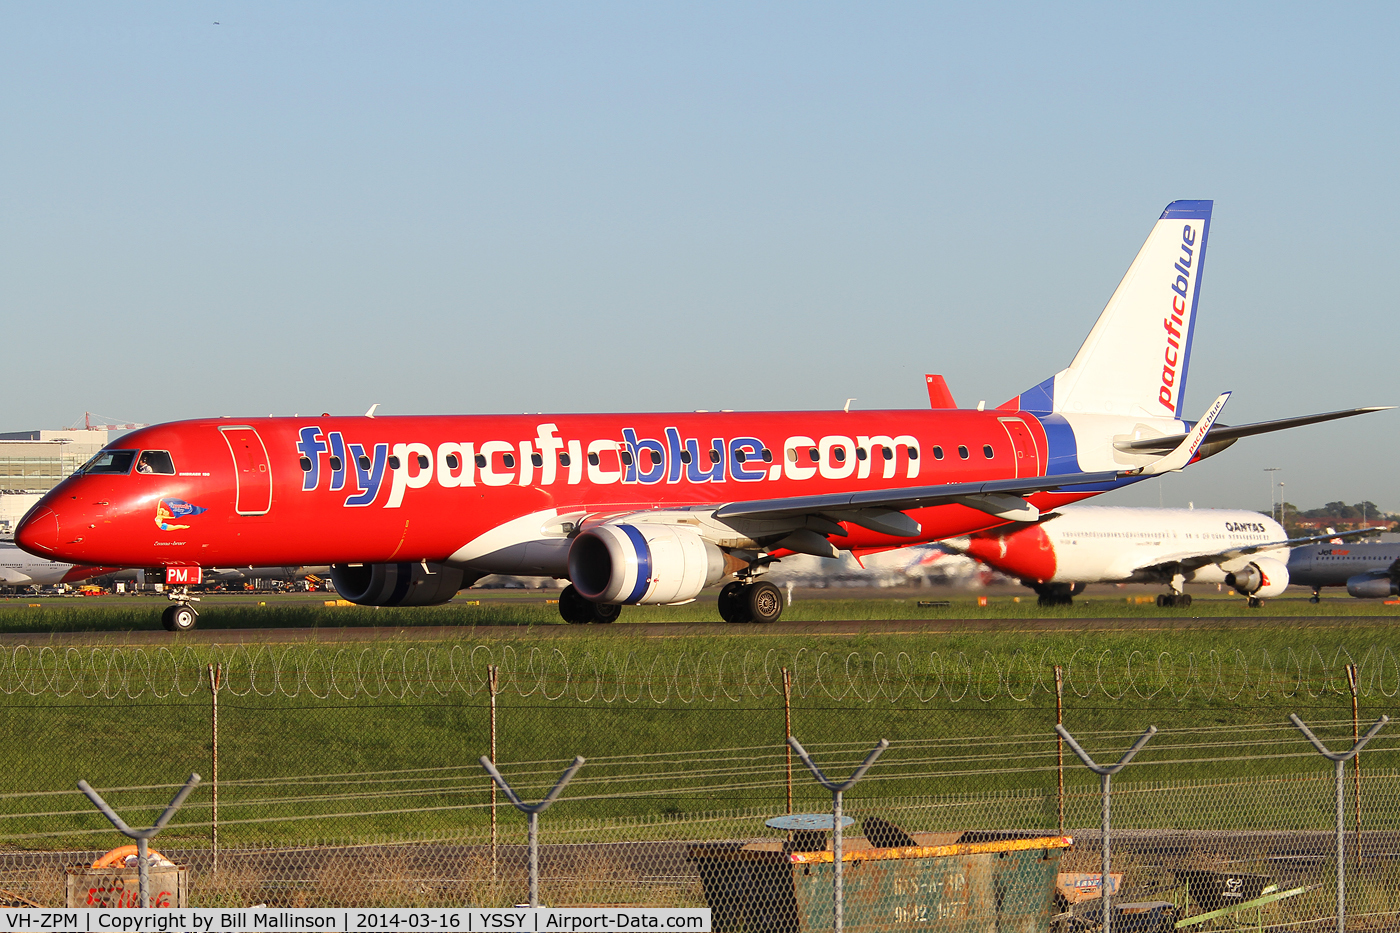 VH-ZPM, 2009 Embraer 190AR (ERJ-190-100IGW) C/N 19000262, taxiing to 34R